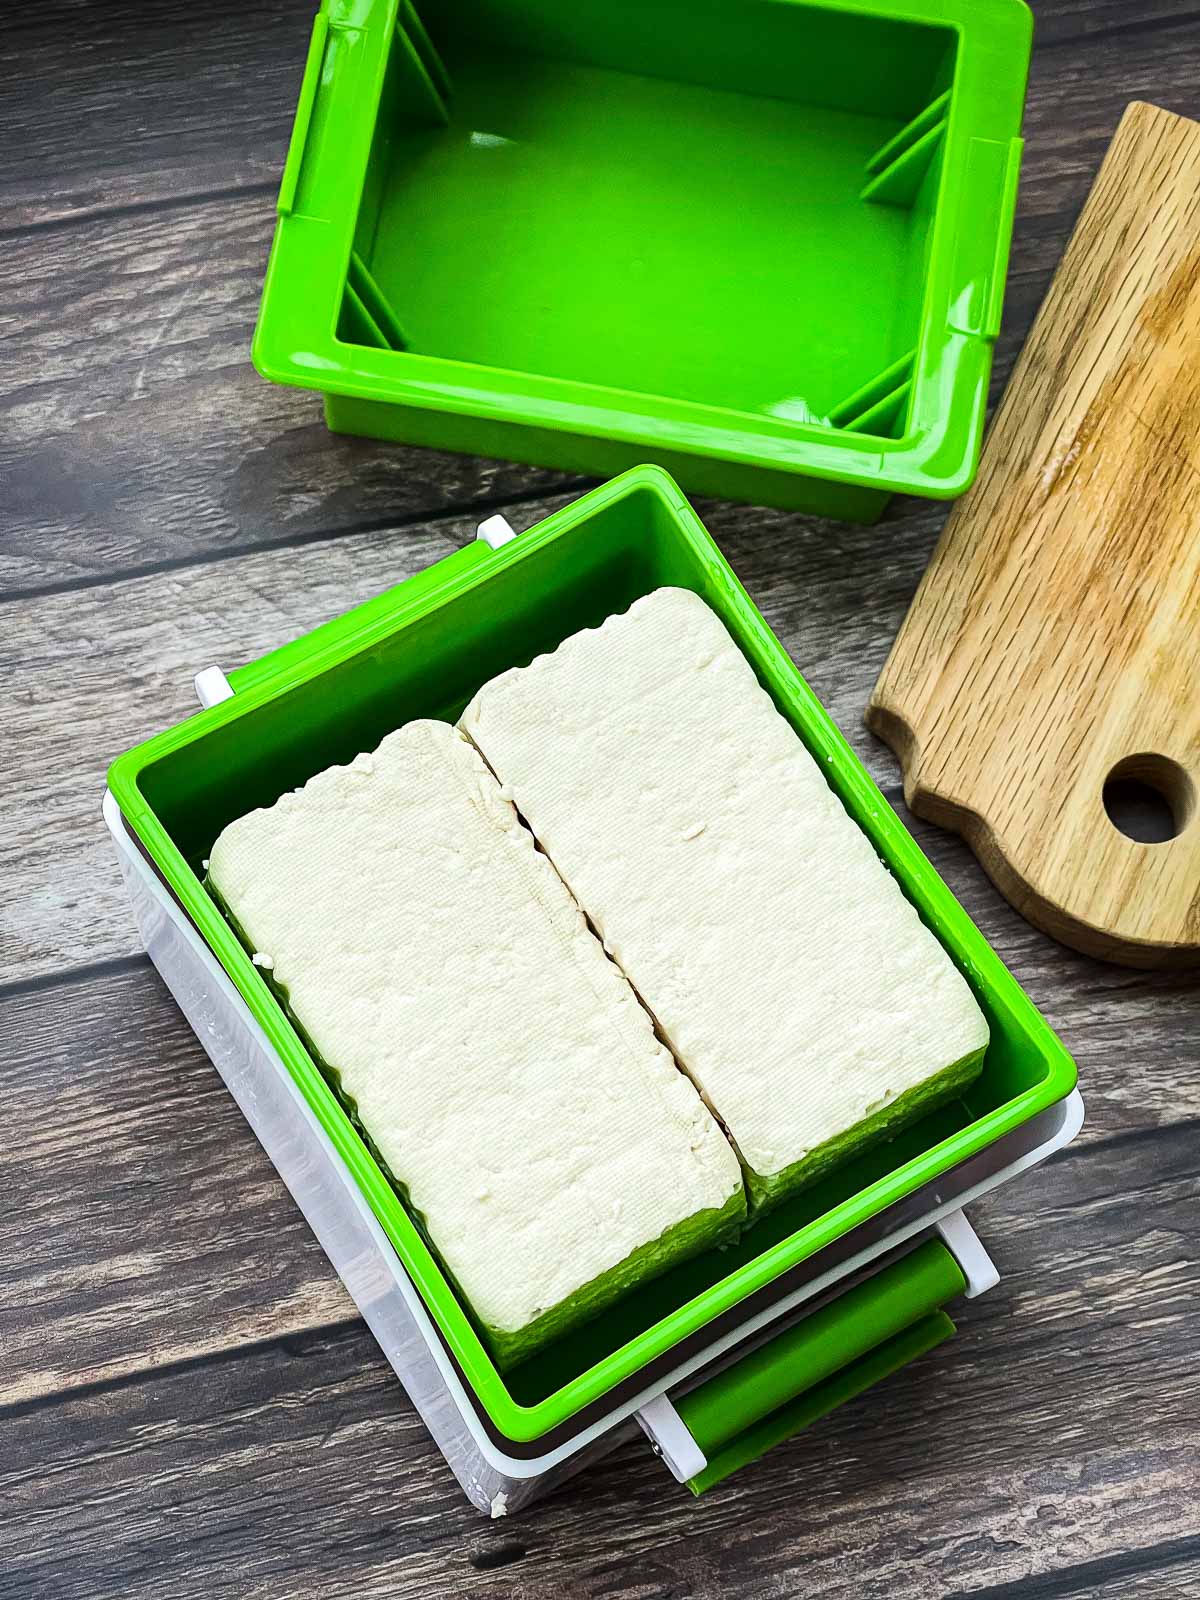 Tofu steaks inside of a green tofu press with a small wooden cutting board on the side.